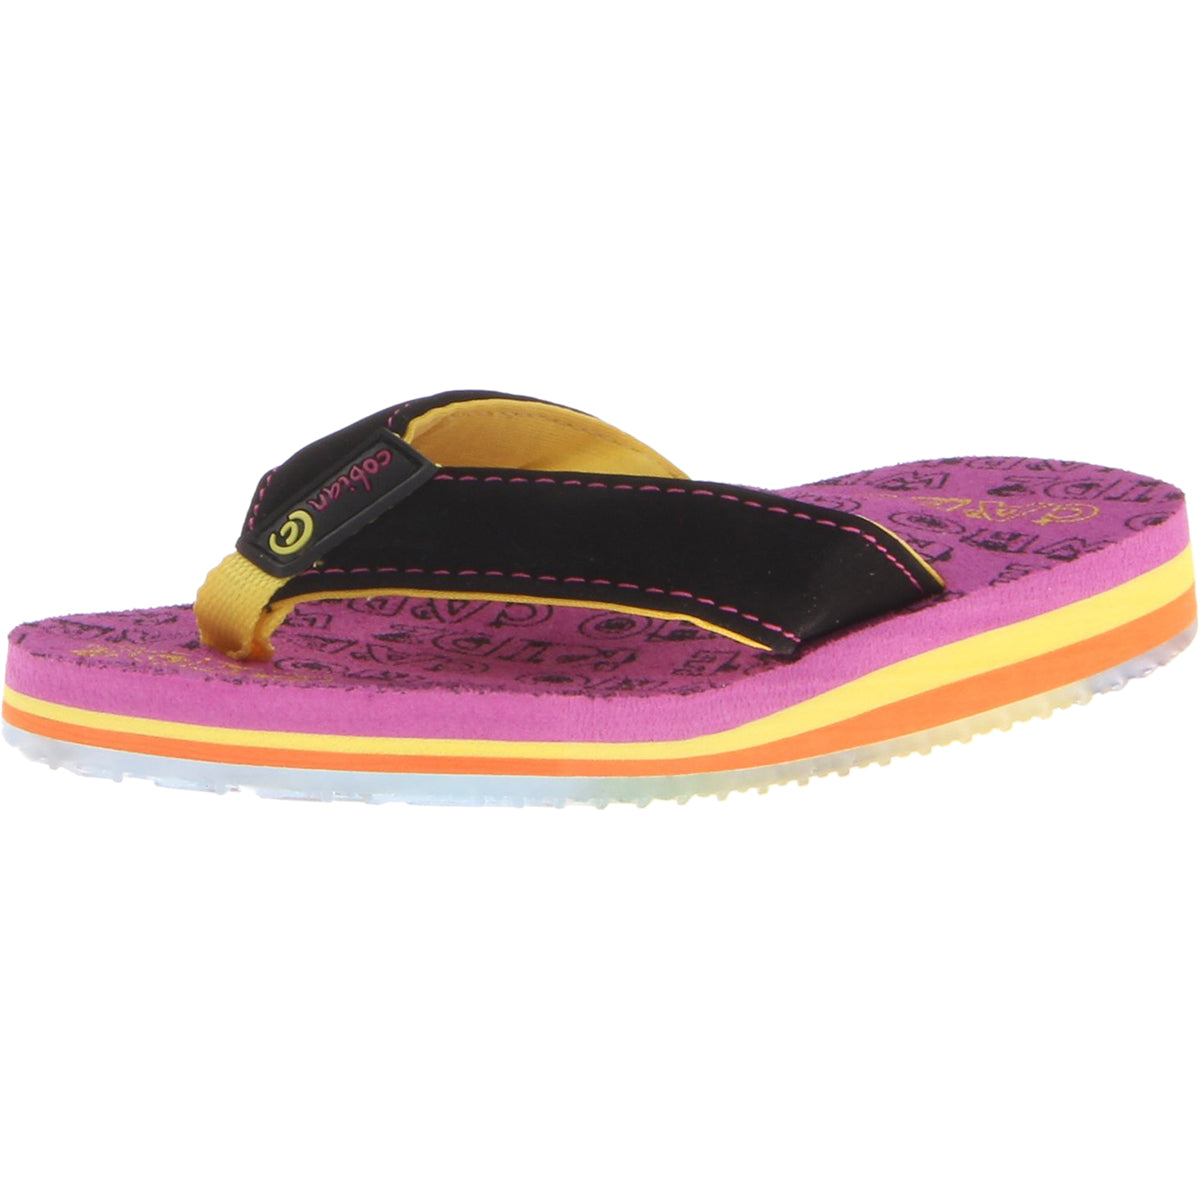 Cobian Who Cares Youth Sandal Footwear-KWC14